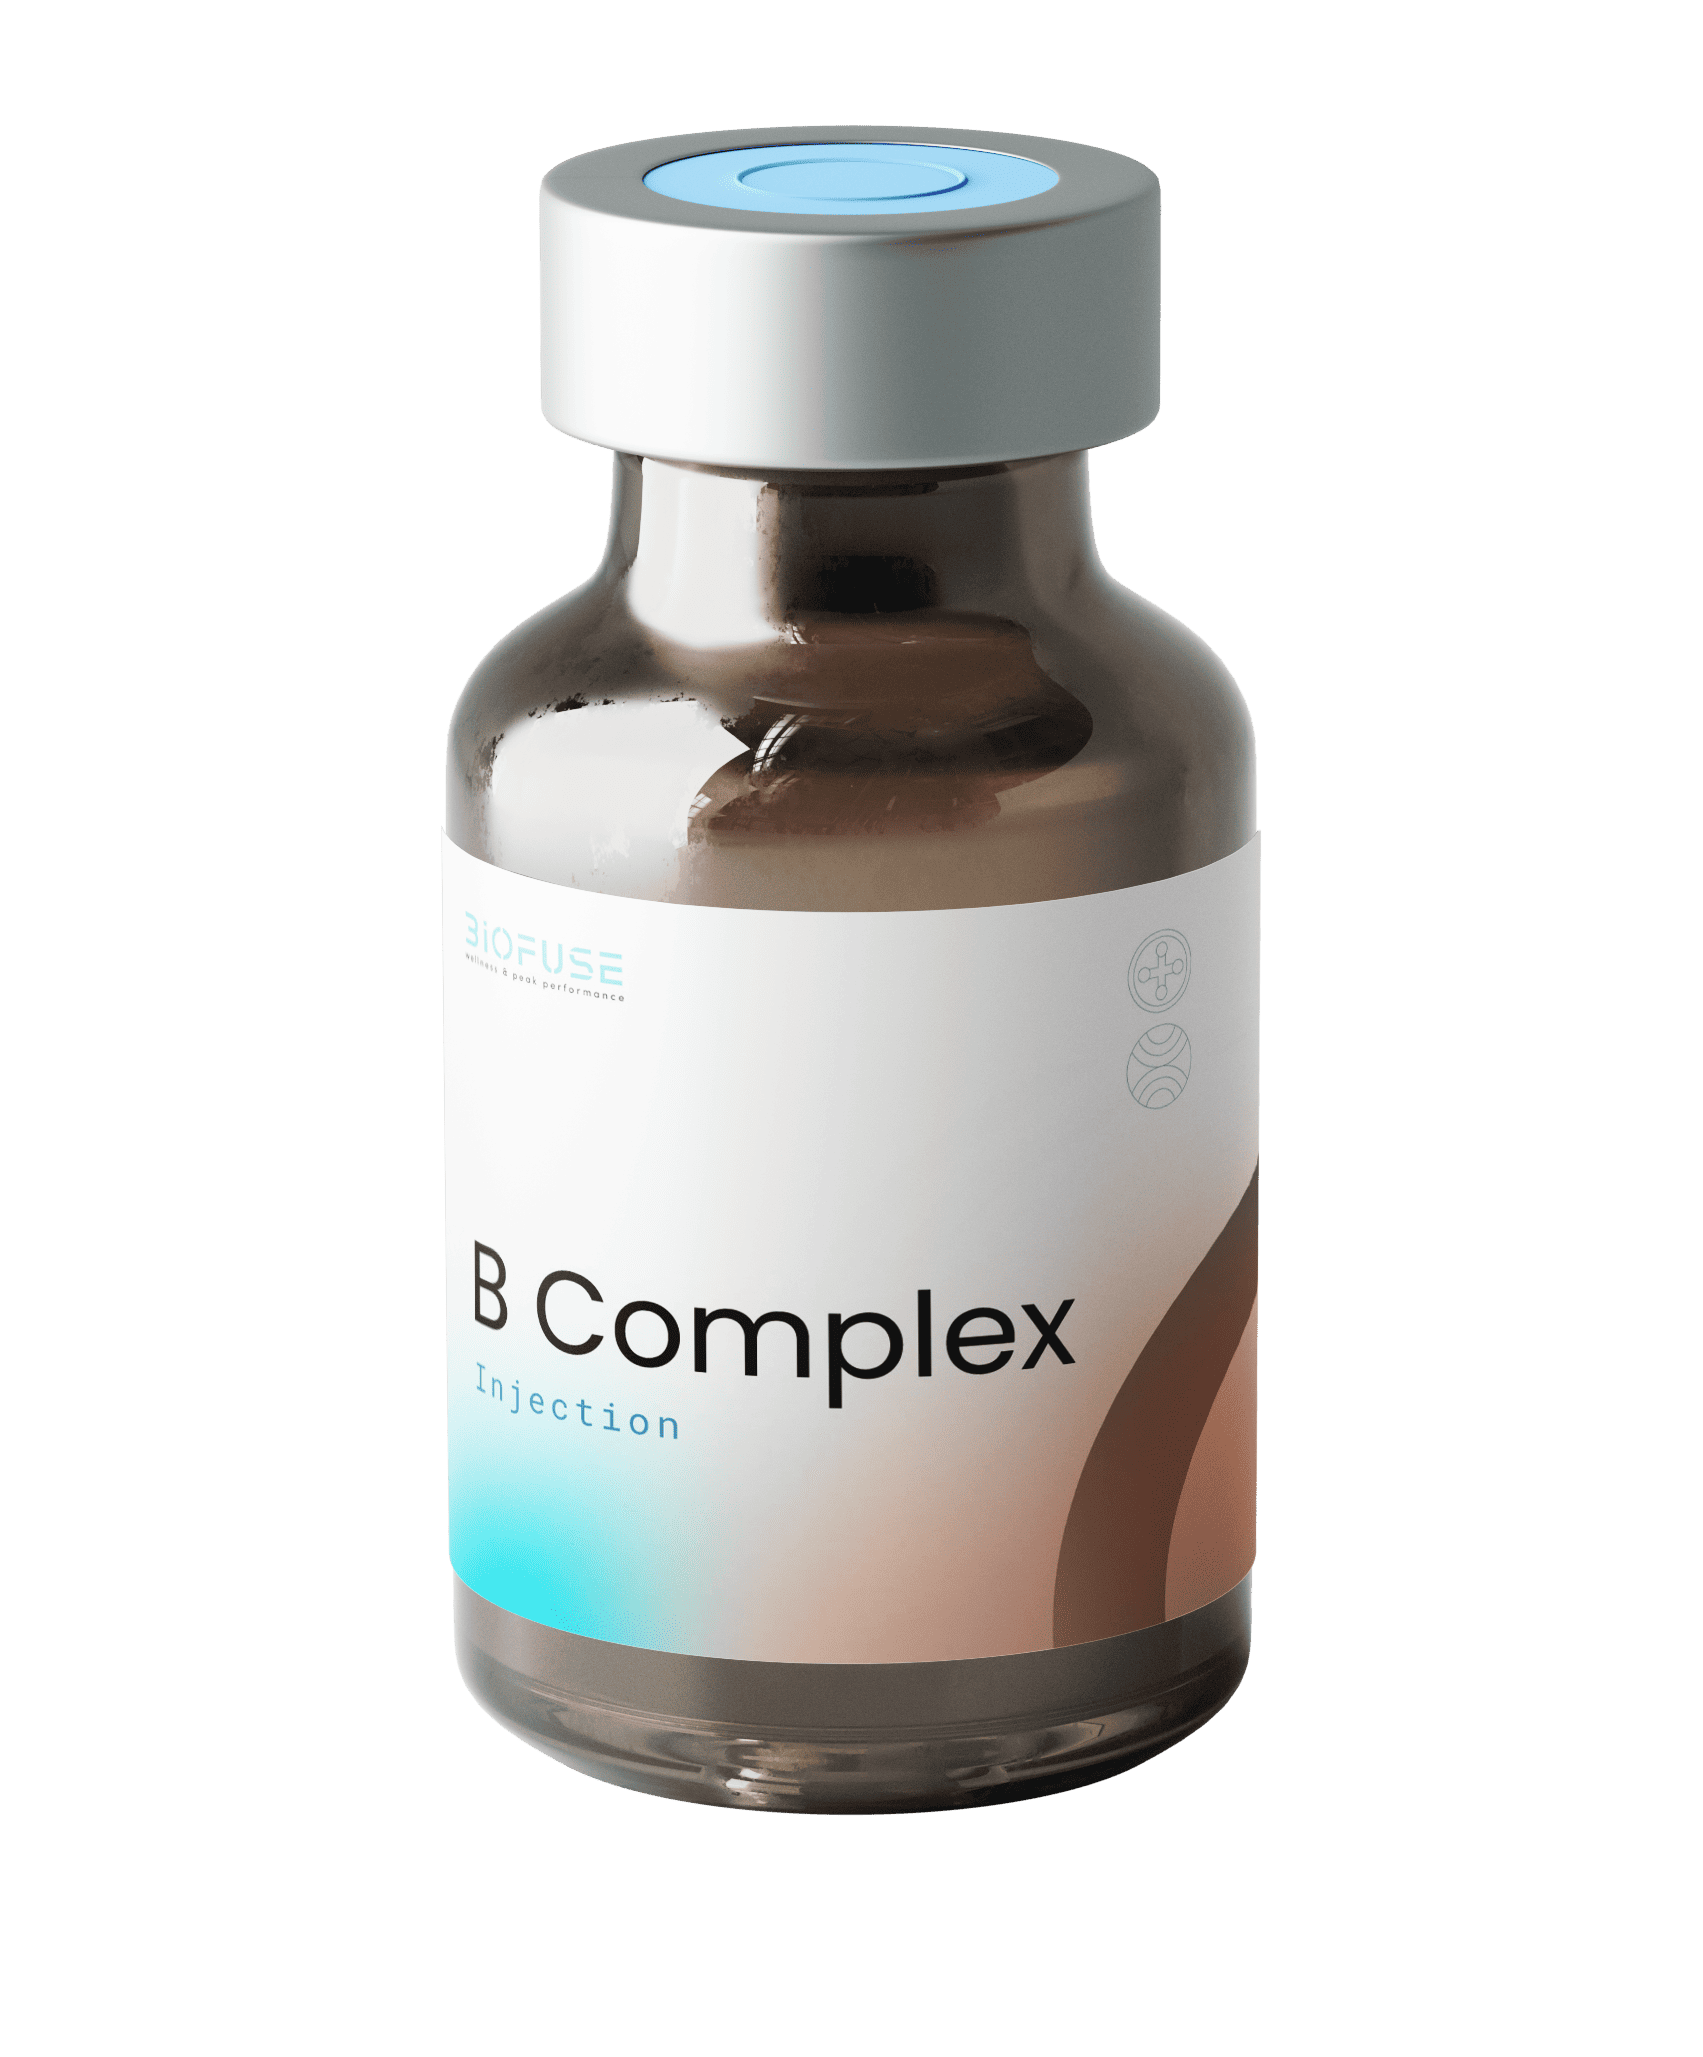 B complex Injection - Biofuse